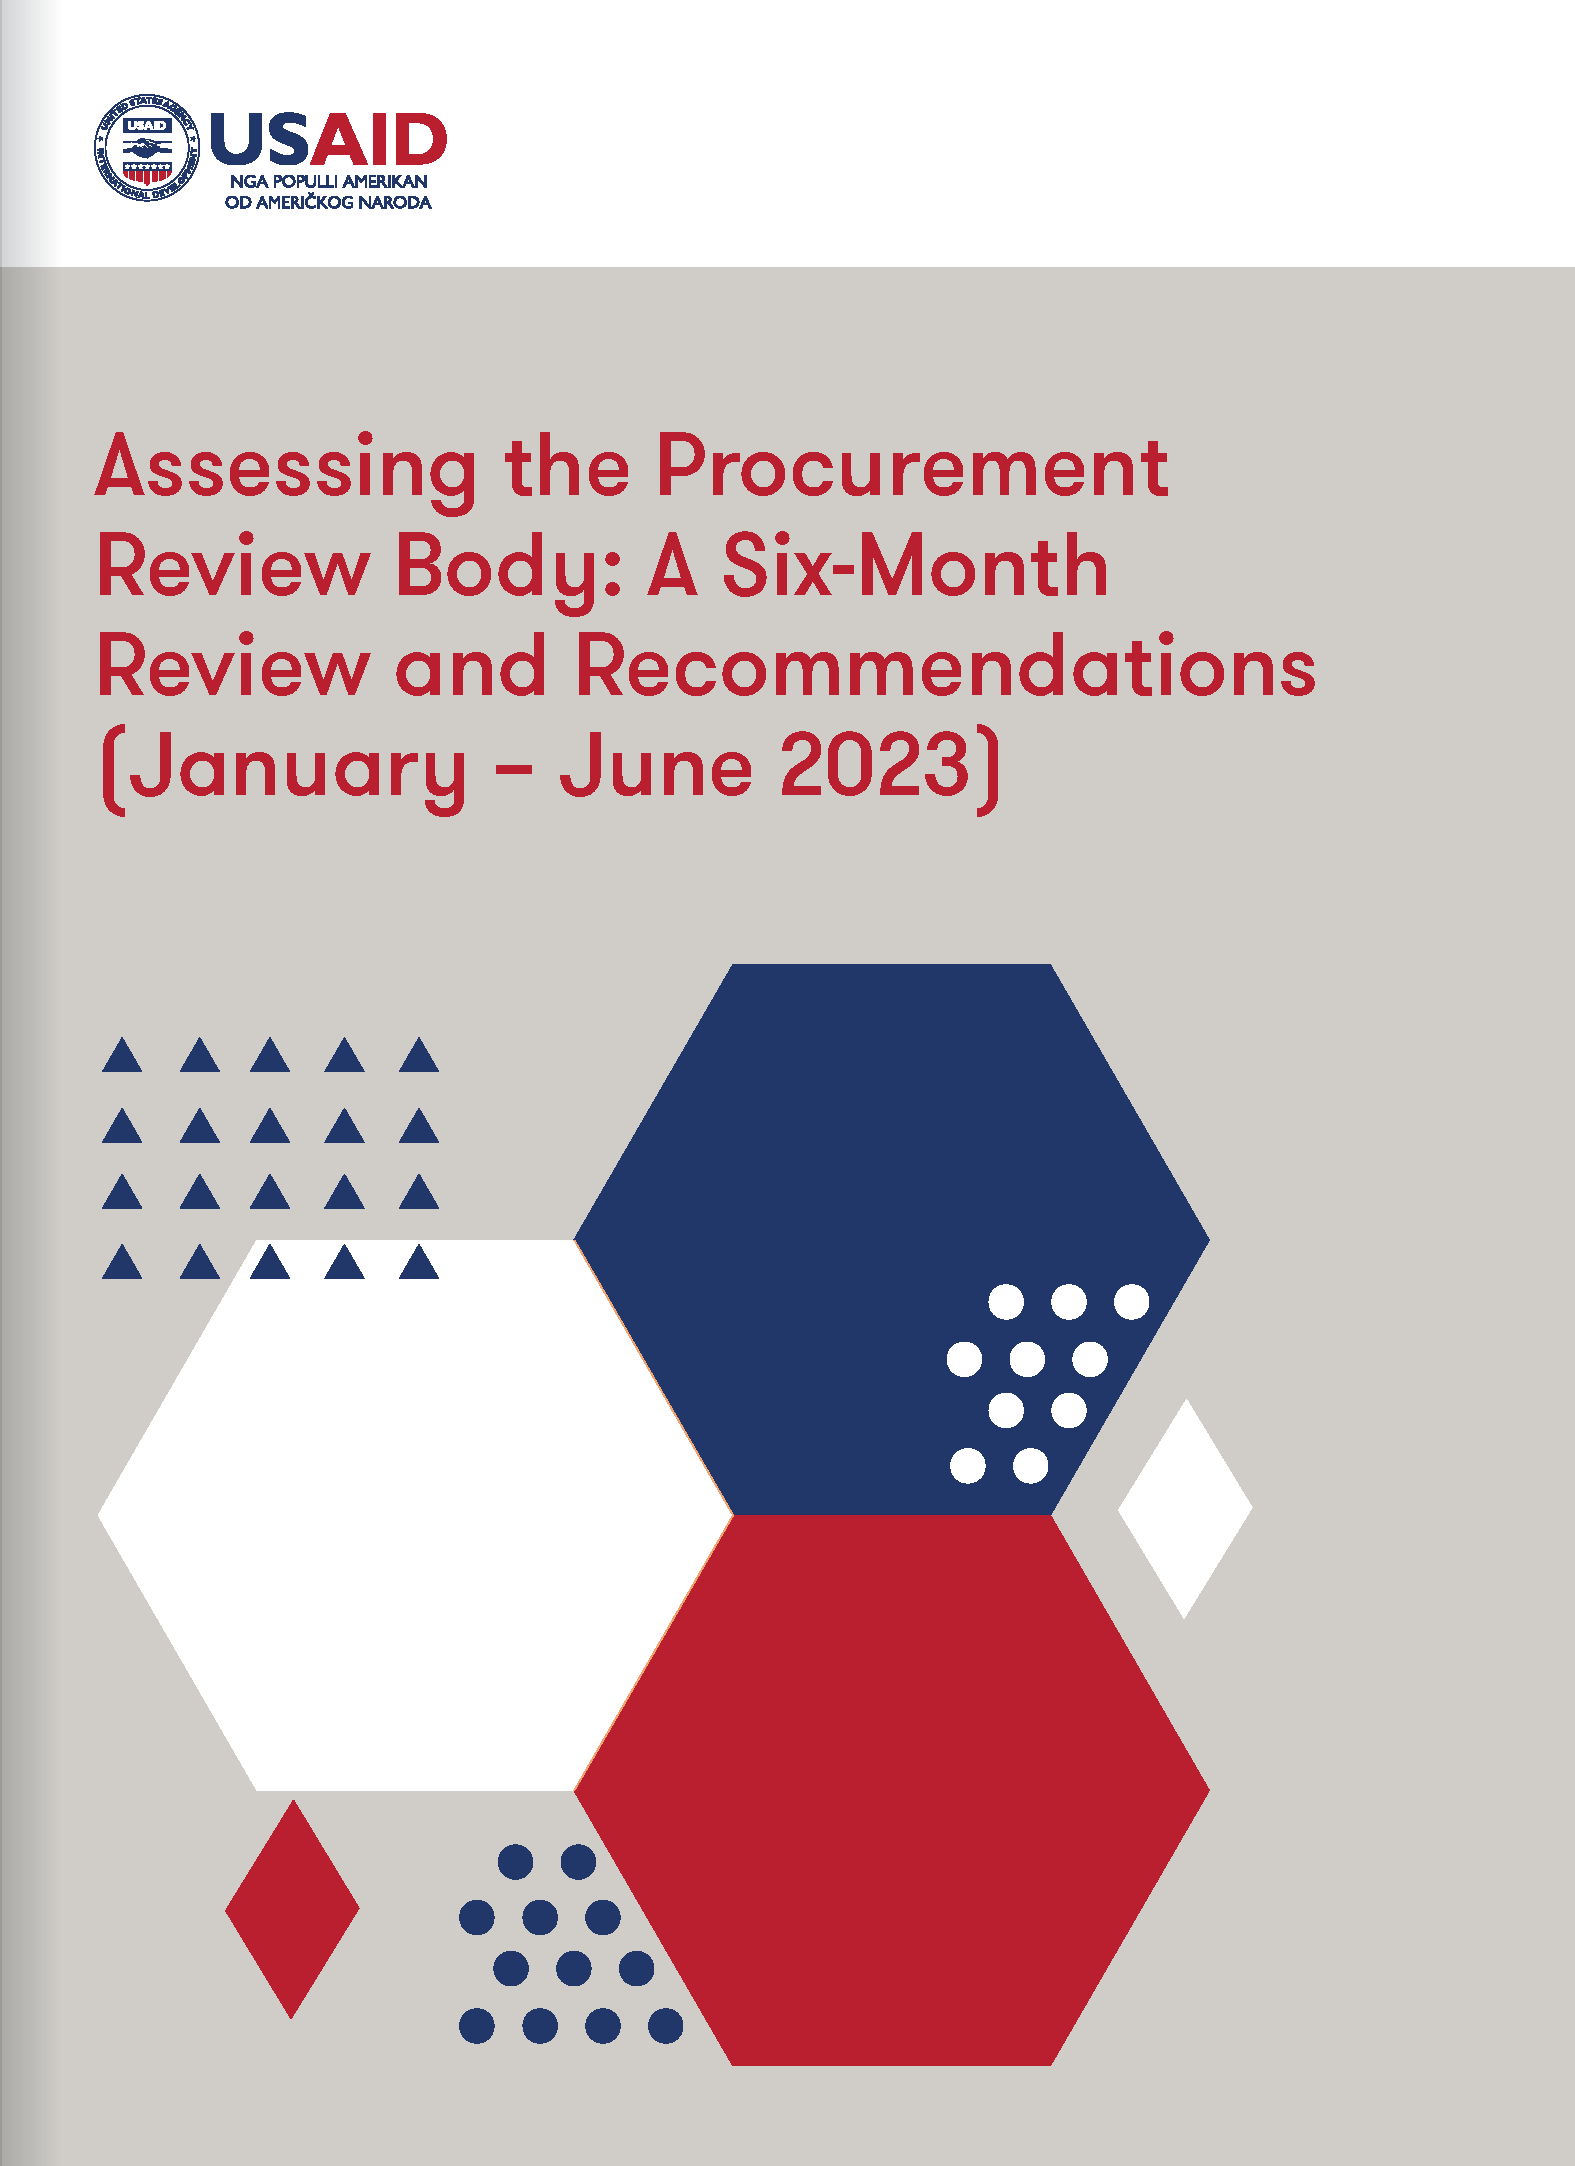 Assessing the Procurement Review Body: A Six-Month Review and Recommendations (January – June 2023)